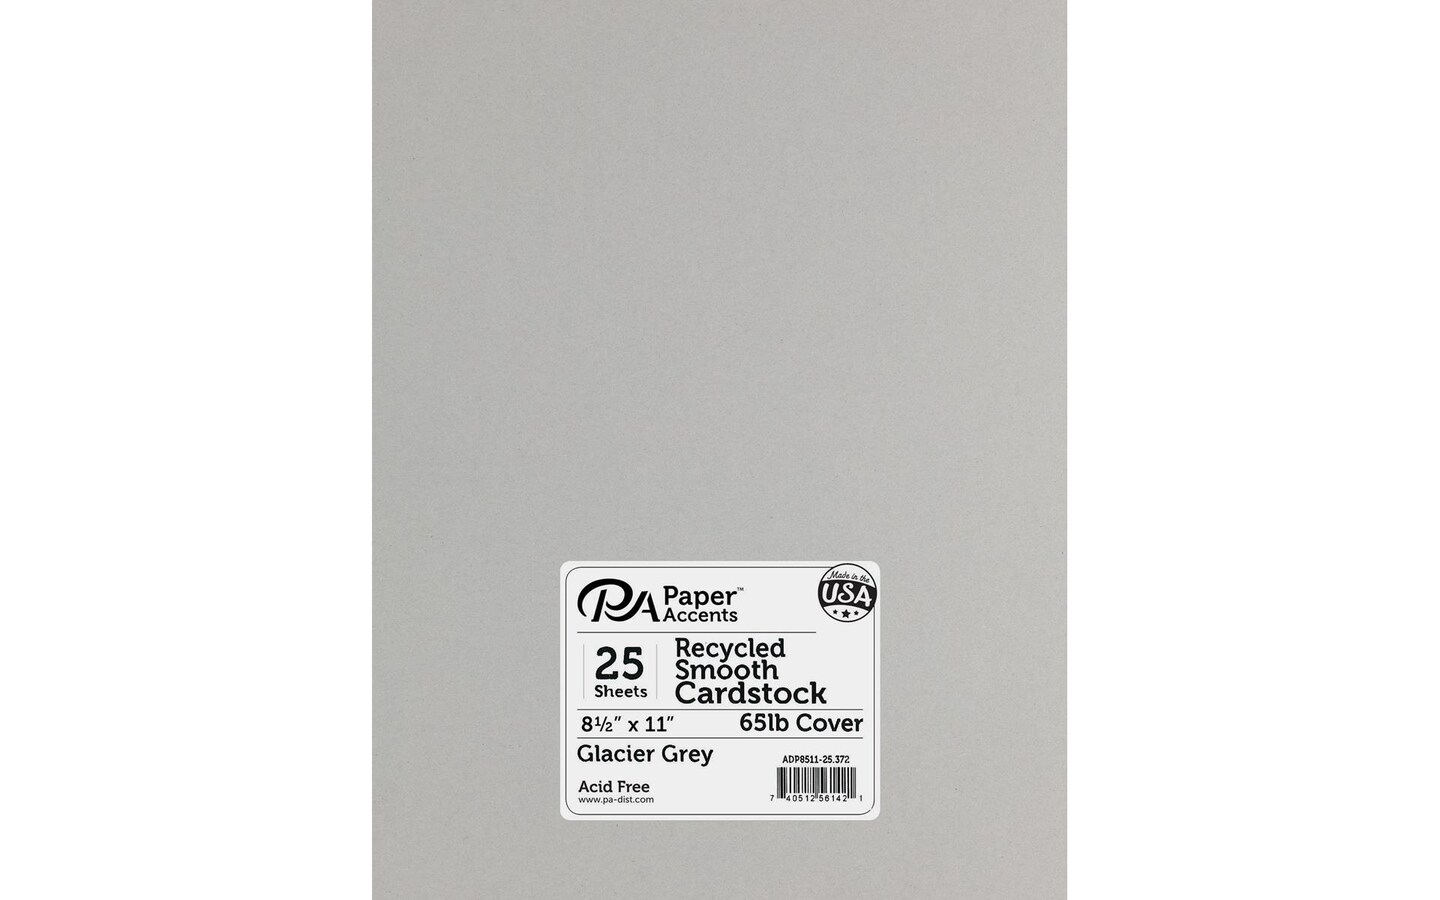 Premium Cardstock Paper 8.5 X 11 In. Black & White 65 Lb. Cover Weight  Perfect for Scrapbooking and Cardmaking 